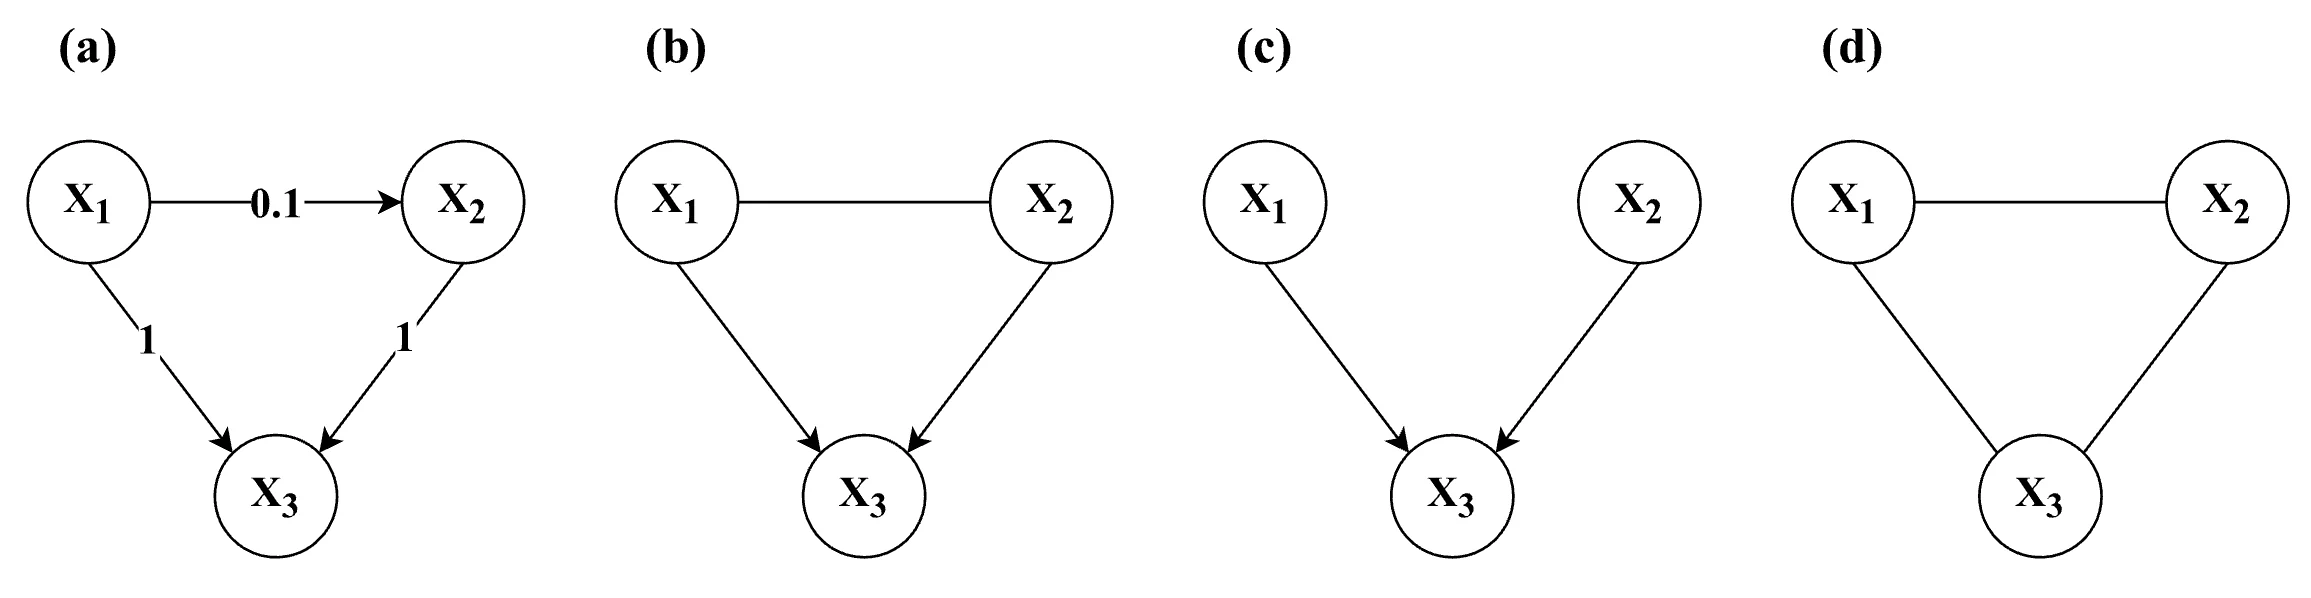 Example of a dense psychometric network graph with a weak causal edge highlighted.